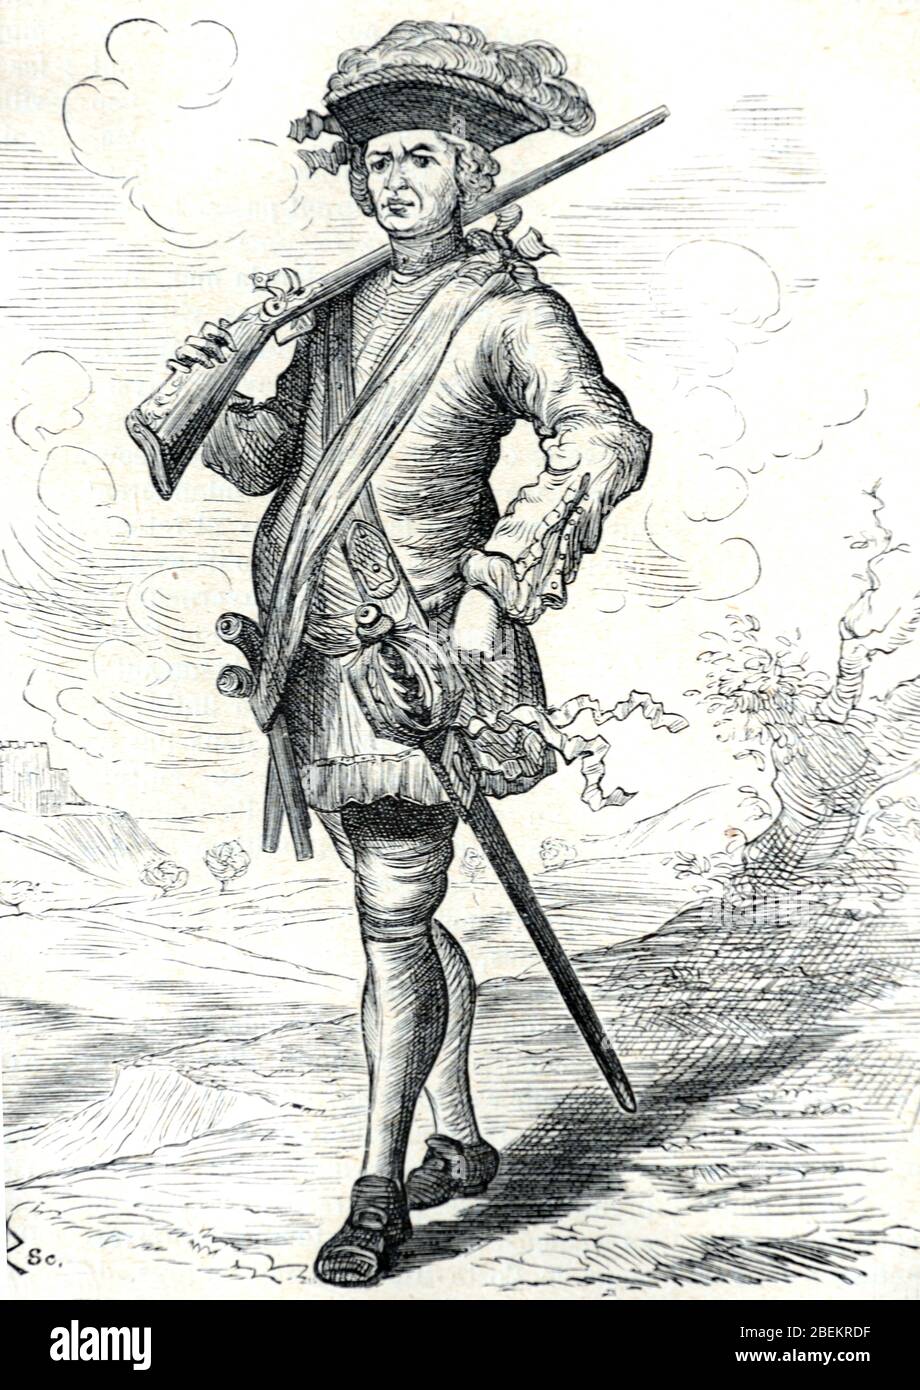 Full-Length Portrait of Sir Henry Morgan (c1635-1688), Holding Rifle & Wearing Sword, Welsh Privateer or Buccaneer, Plantation & Lietenant Governor of Jamaica. Vintage or Old Illustration or Engraving Stock Photo